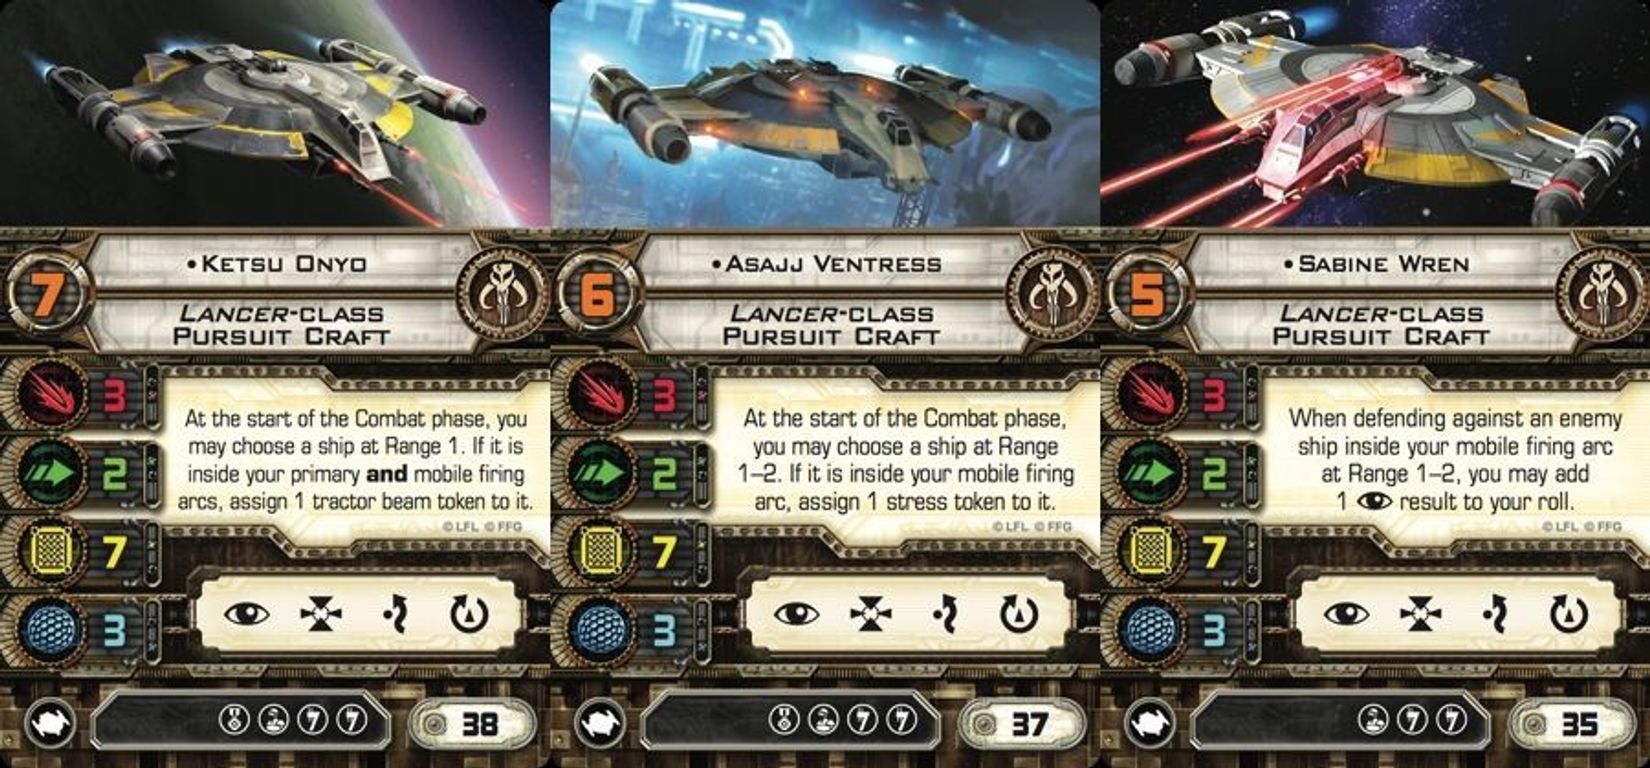 Star Wars: X-Wing Miniatures Game - Shadow Caster Expansion Pack kaarten